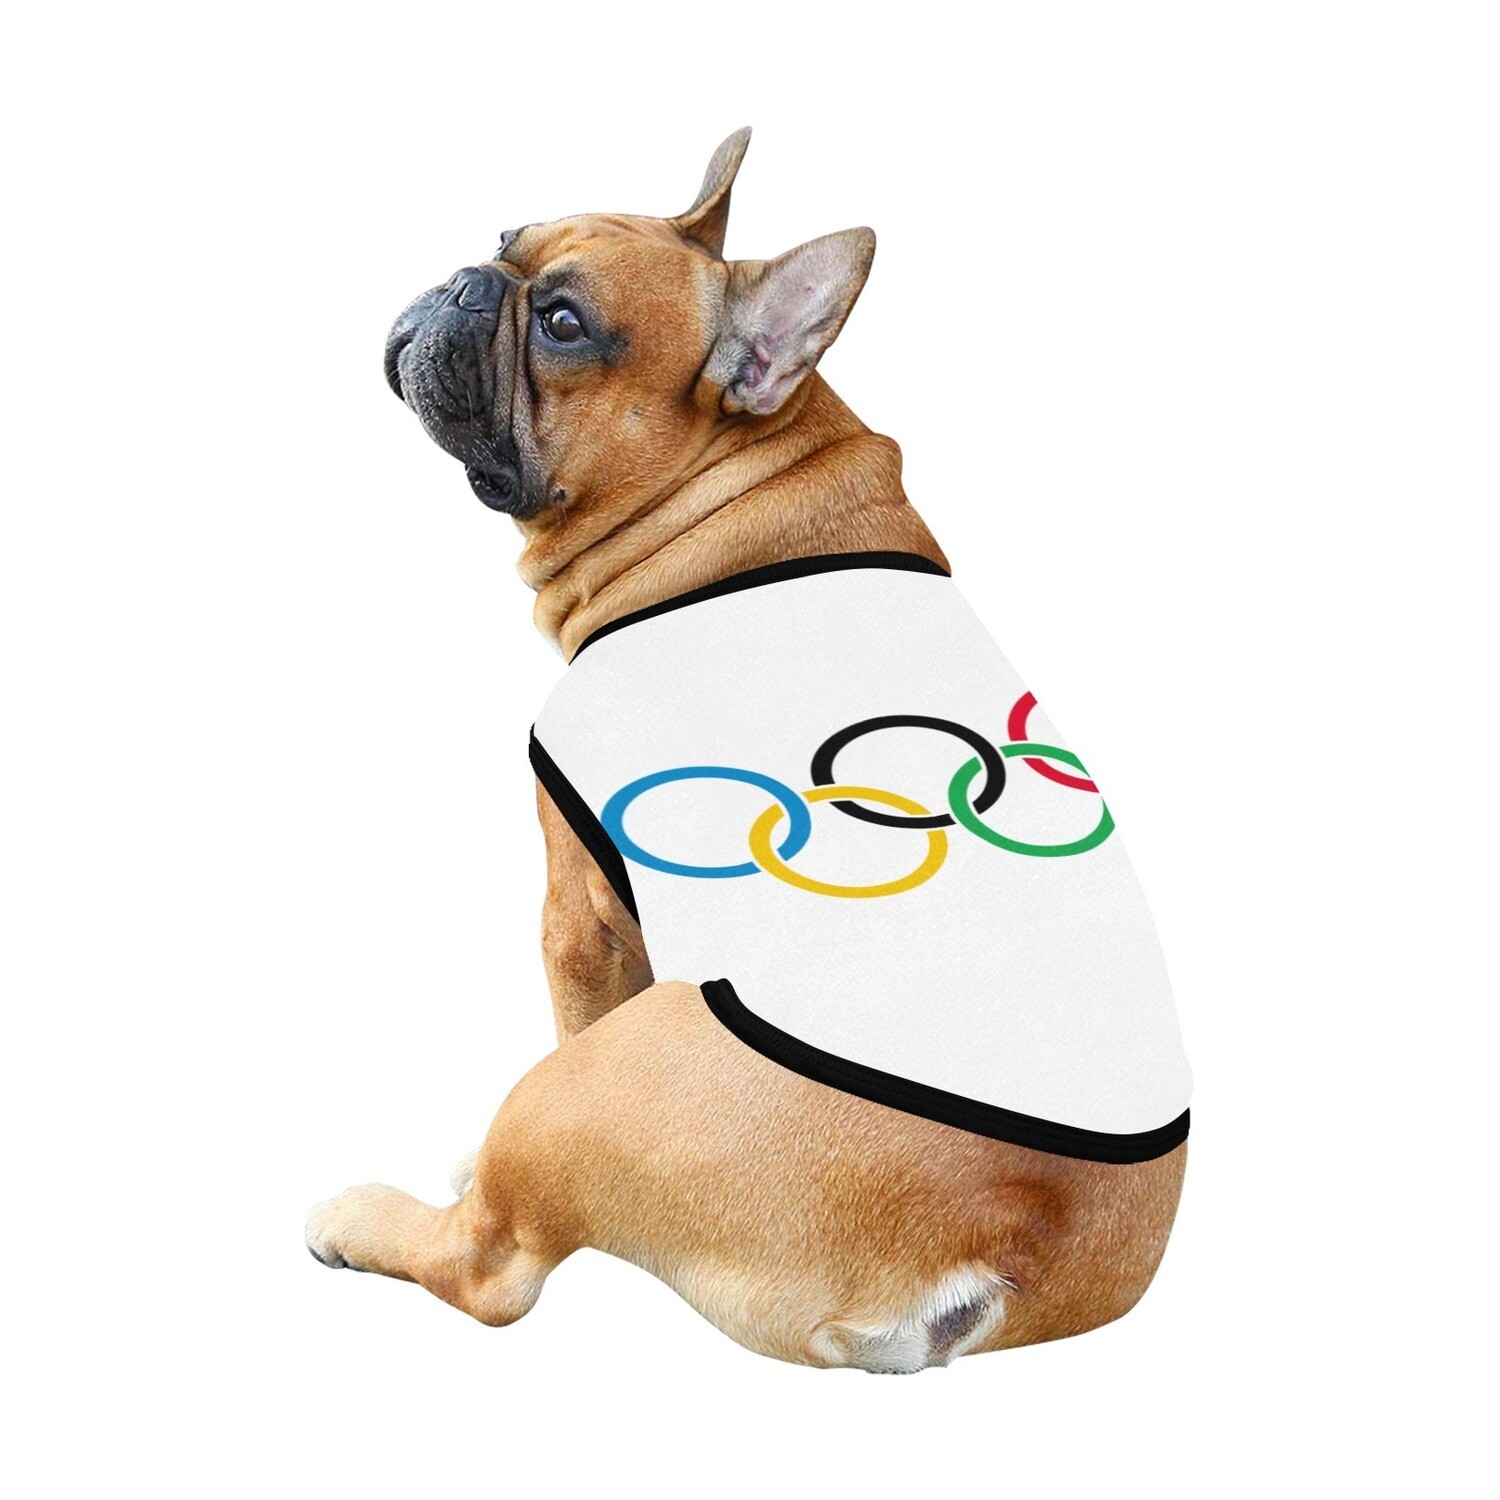 🐕 I love Sports, Olympic Rings, Game on! dog t-shirt, dog gift, dog tank top, dog shirt, dog clothes, gift, 7 sizes XS to 3XL, white